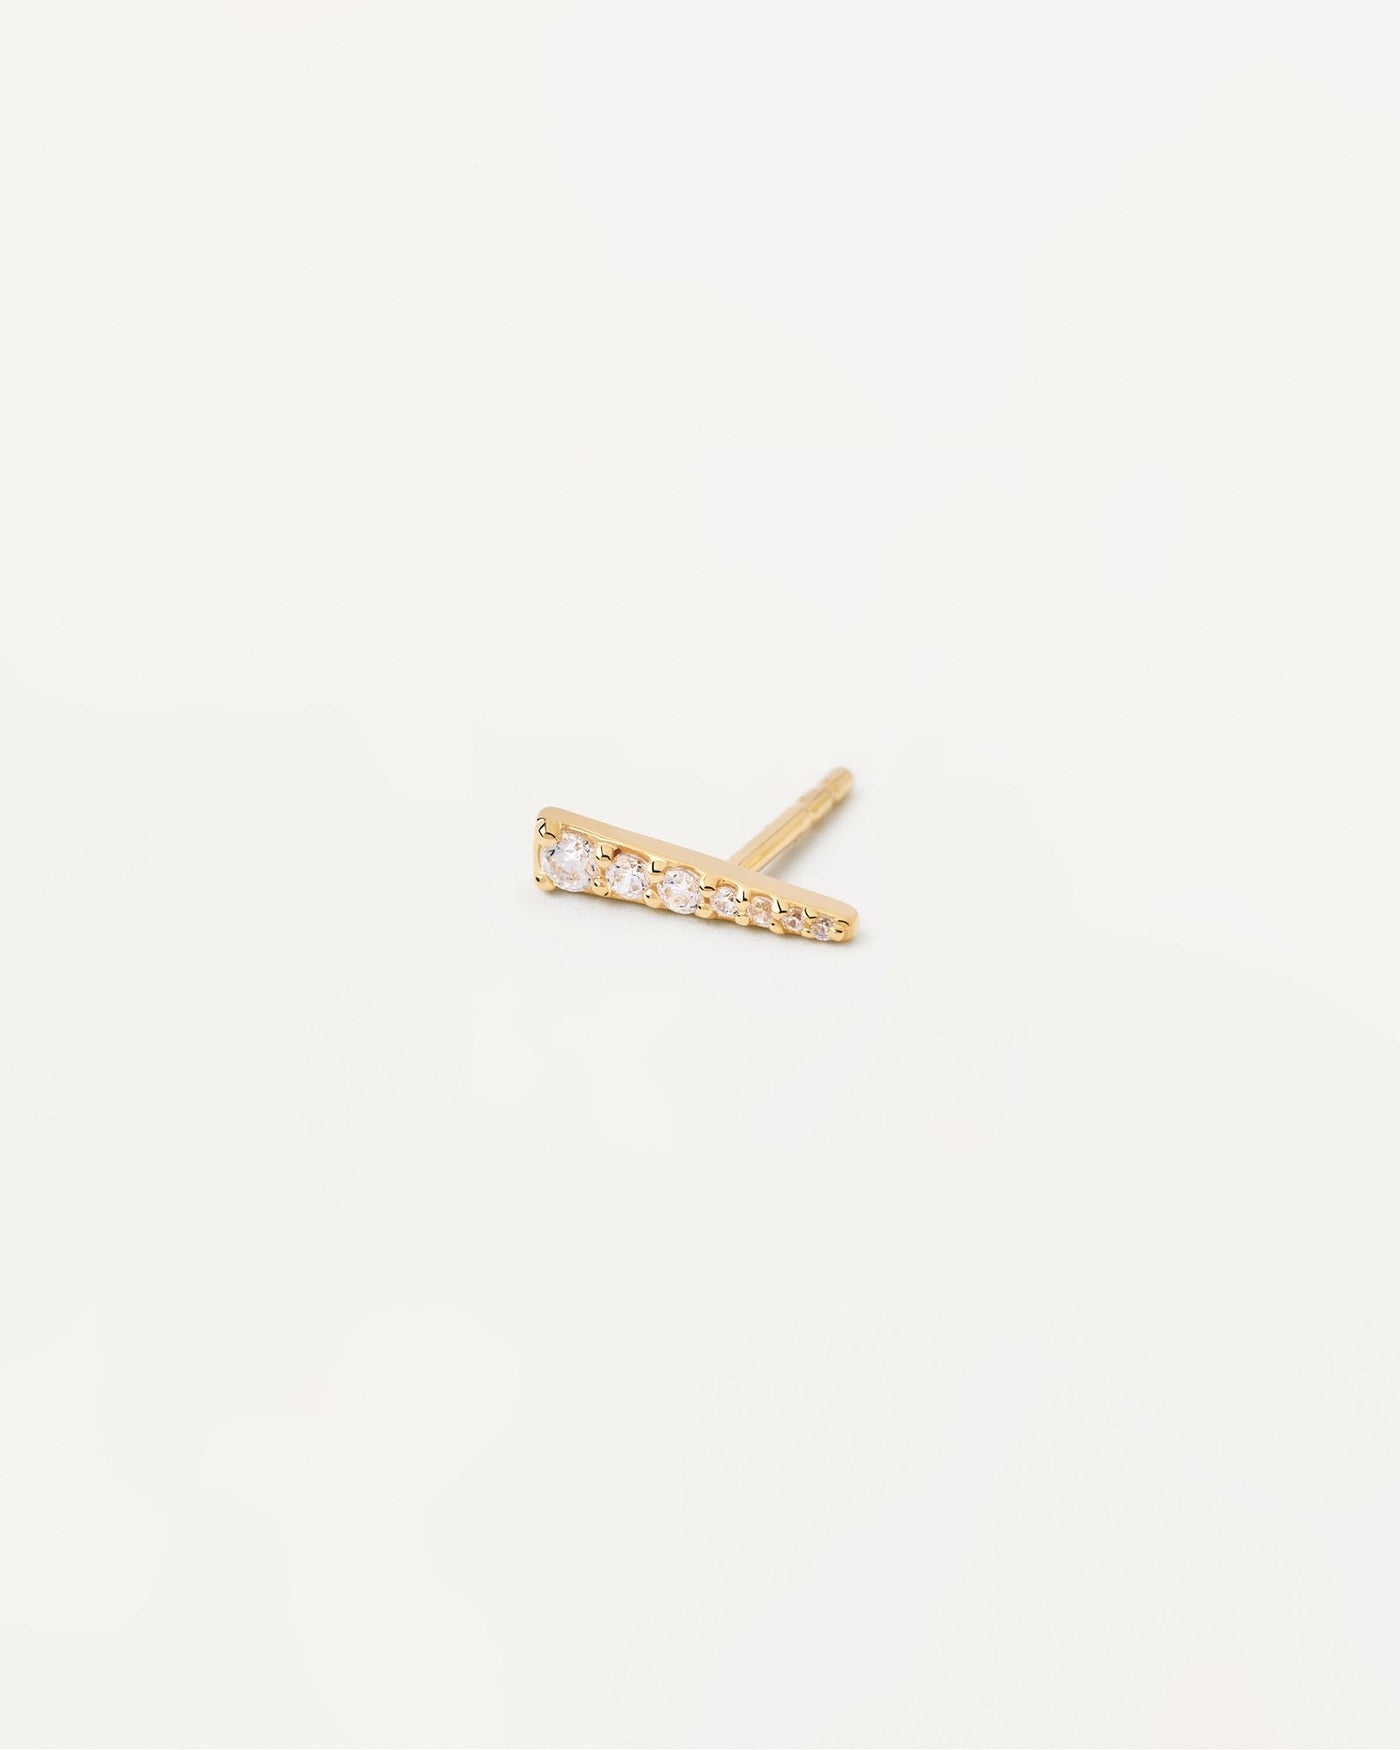 2024 Selection | Tea Single Earring. Gold-plated ear piercing in tip shape with white crystals. Get the latest arrival from PDPAOLA. Place your order safely and get this Best Seller. Free Shipping.